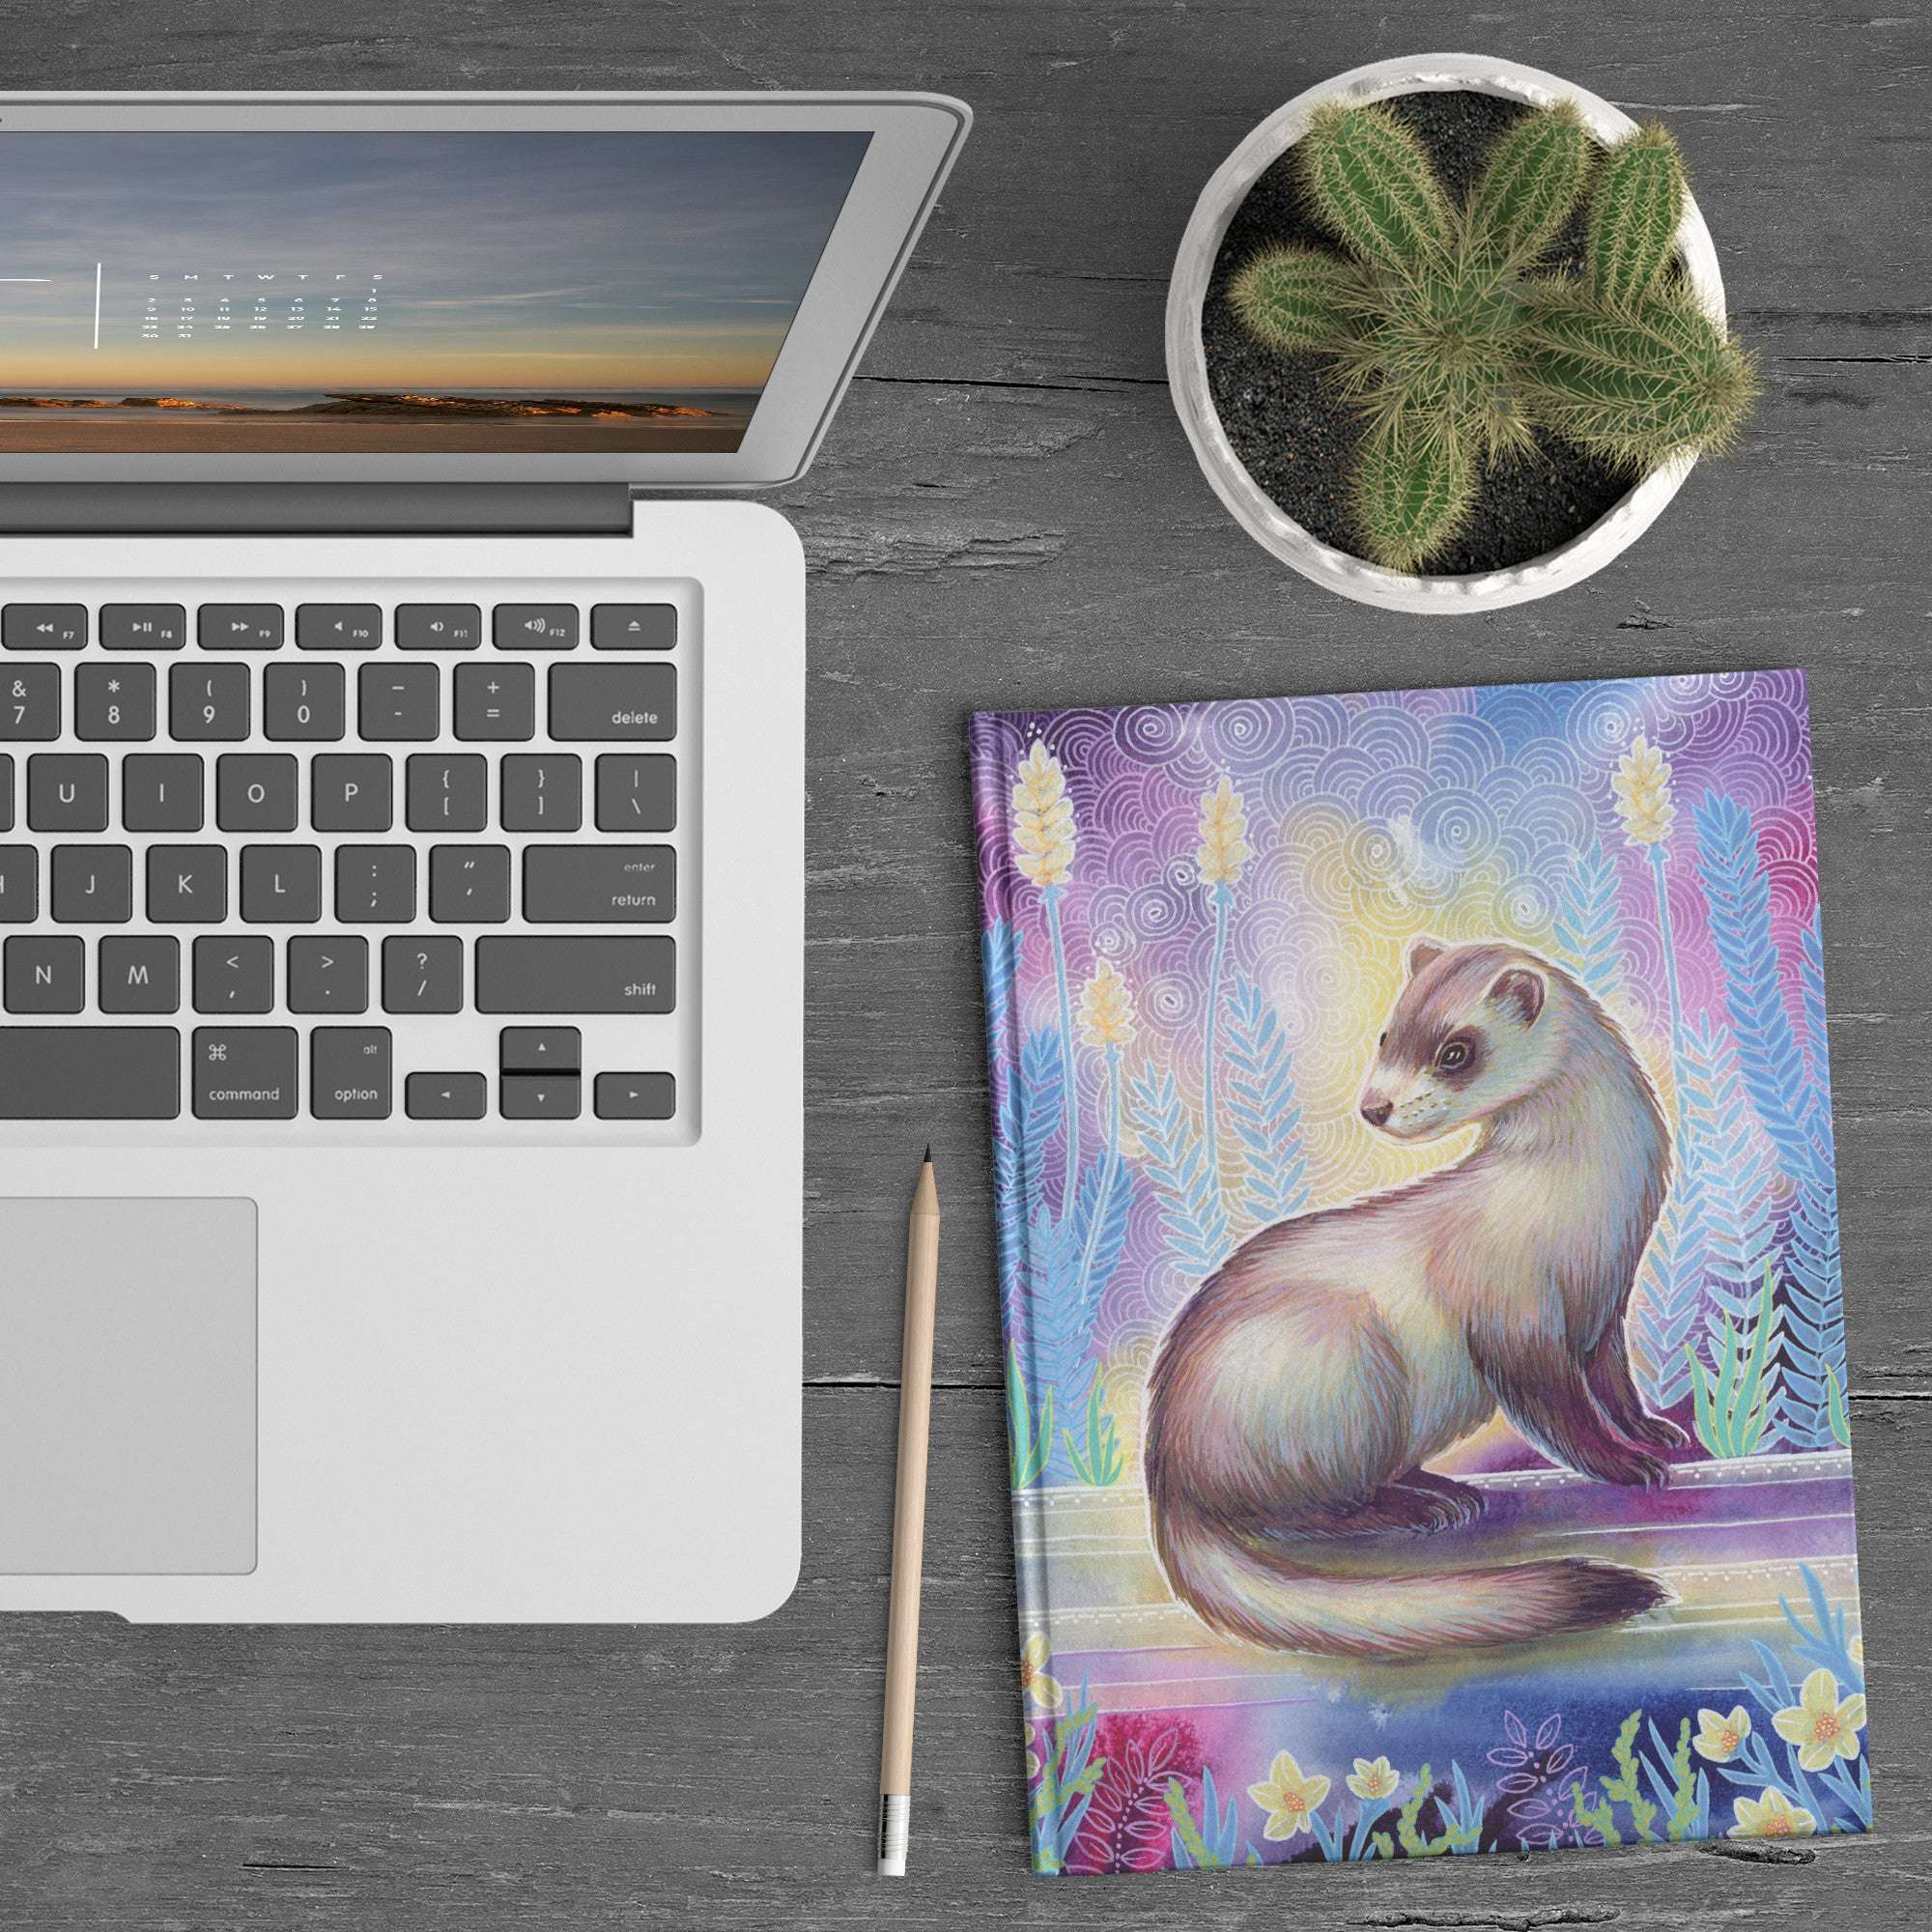 A laptop, Ferret Journal with a colorful ferret illustration, a pencil, and a potted cactus on a wooden table.